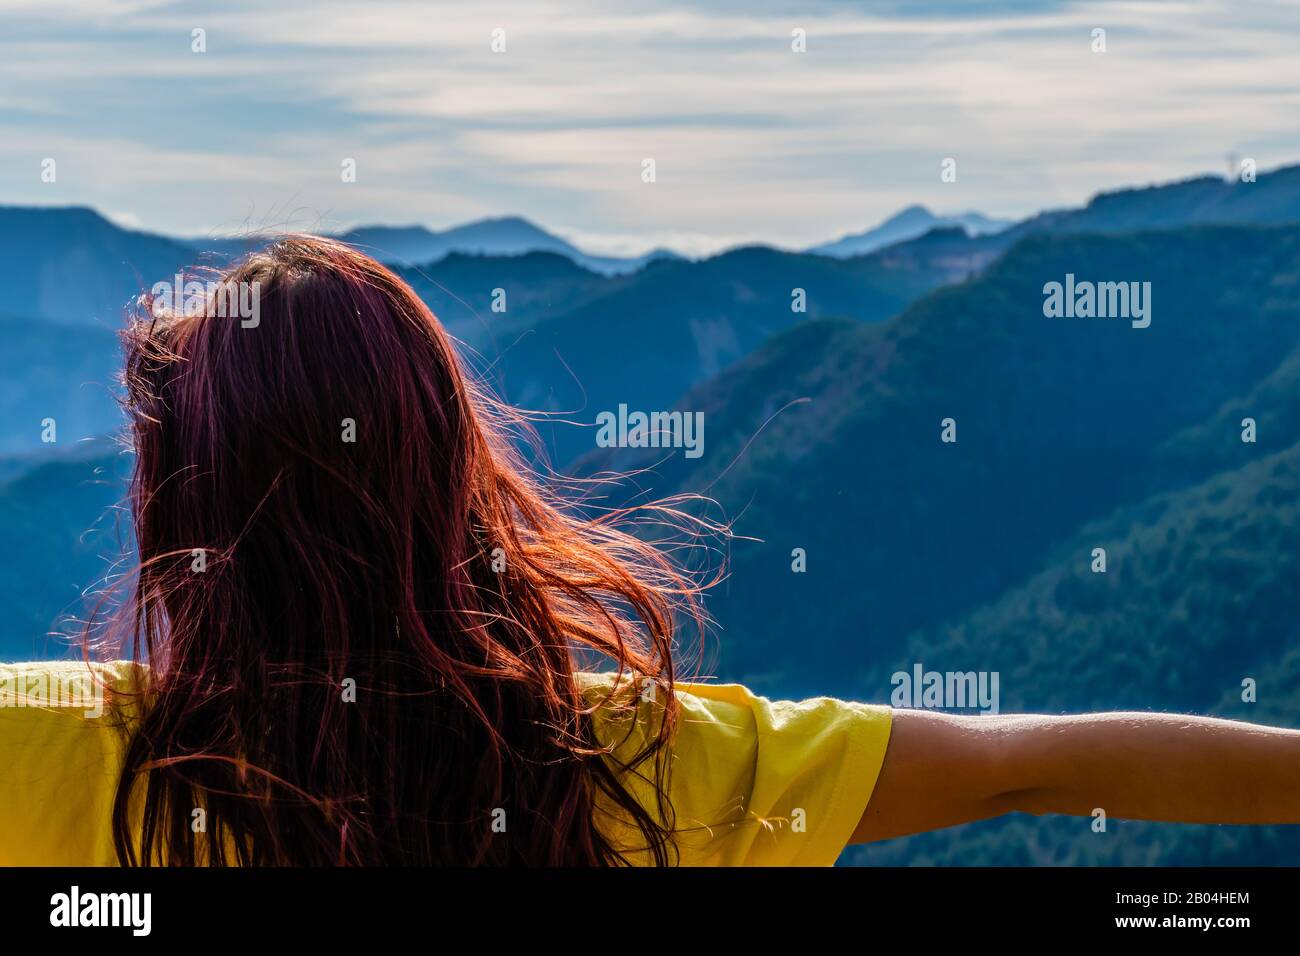 A close-up back view of a young redhead woman in front of the mountain landscape arms raised and hair fluttering from behind with no face on a sunny w Stock Photo